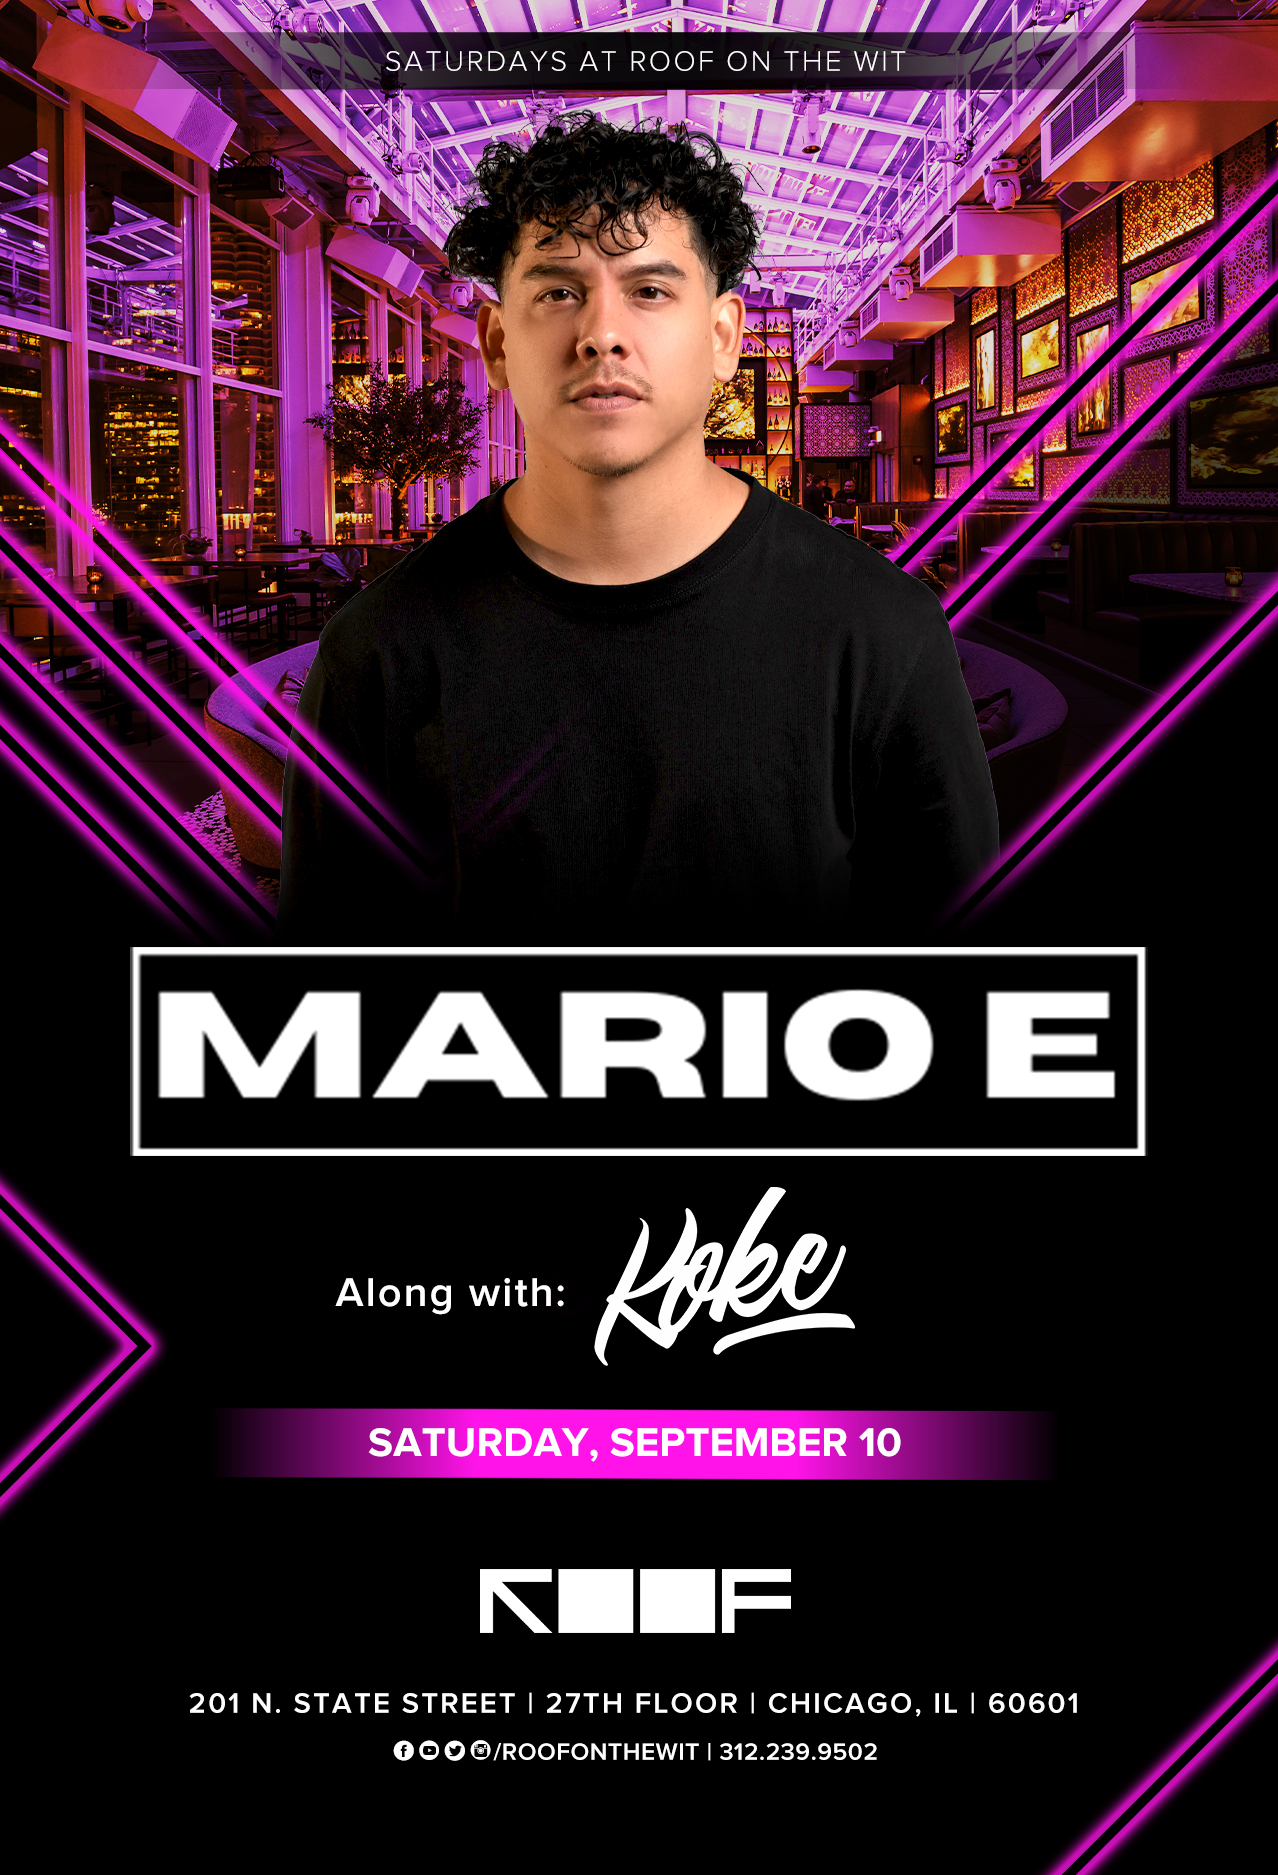 MARIO E September 10 | ROOF on theWit